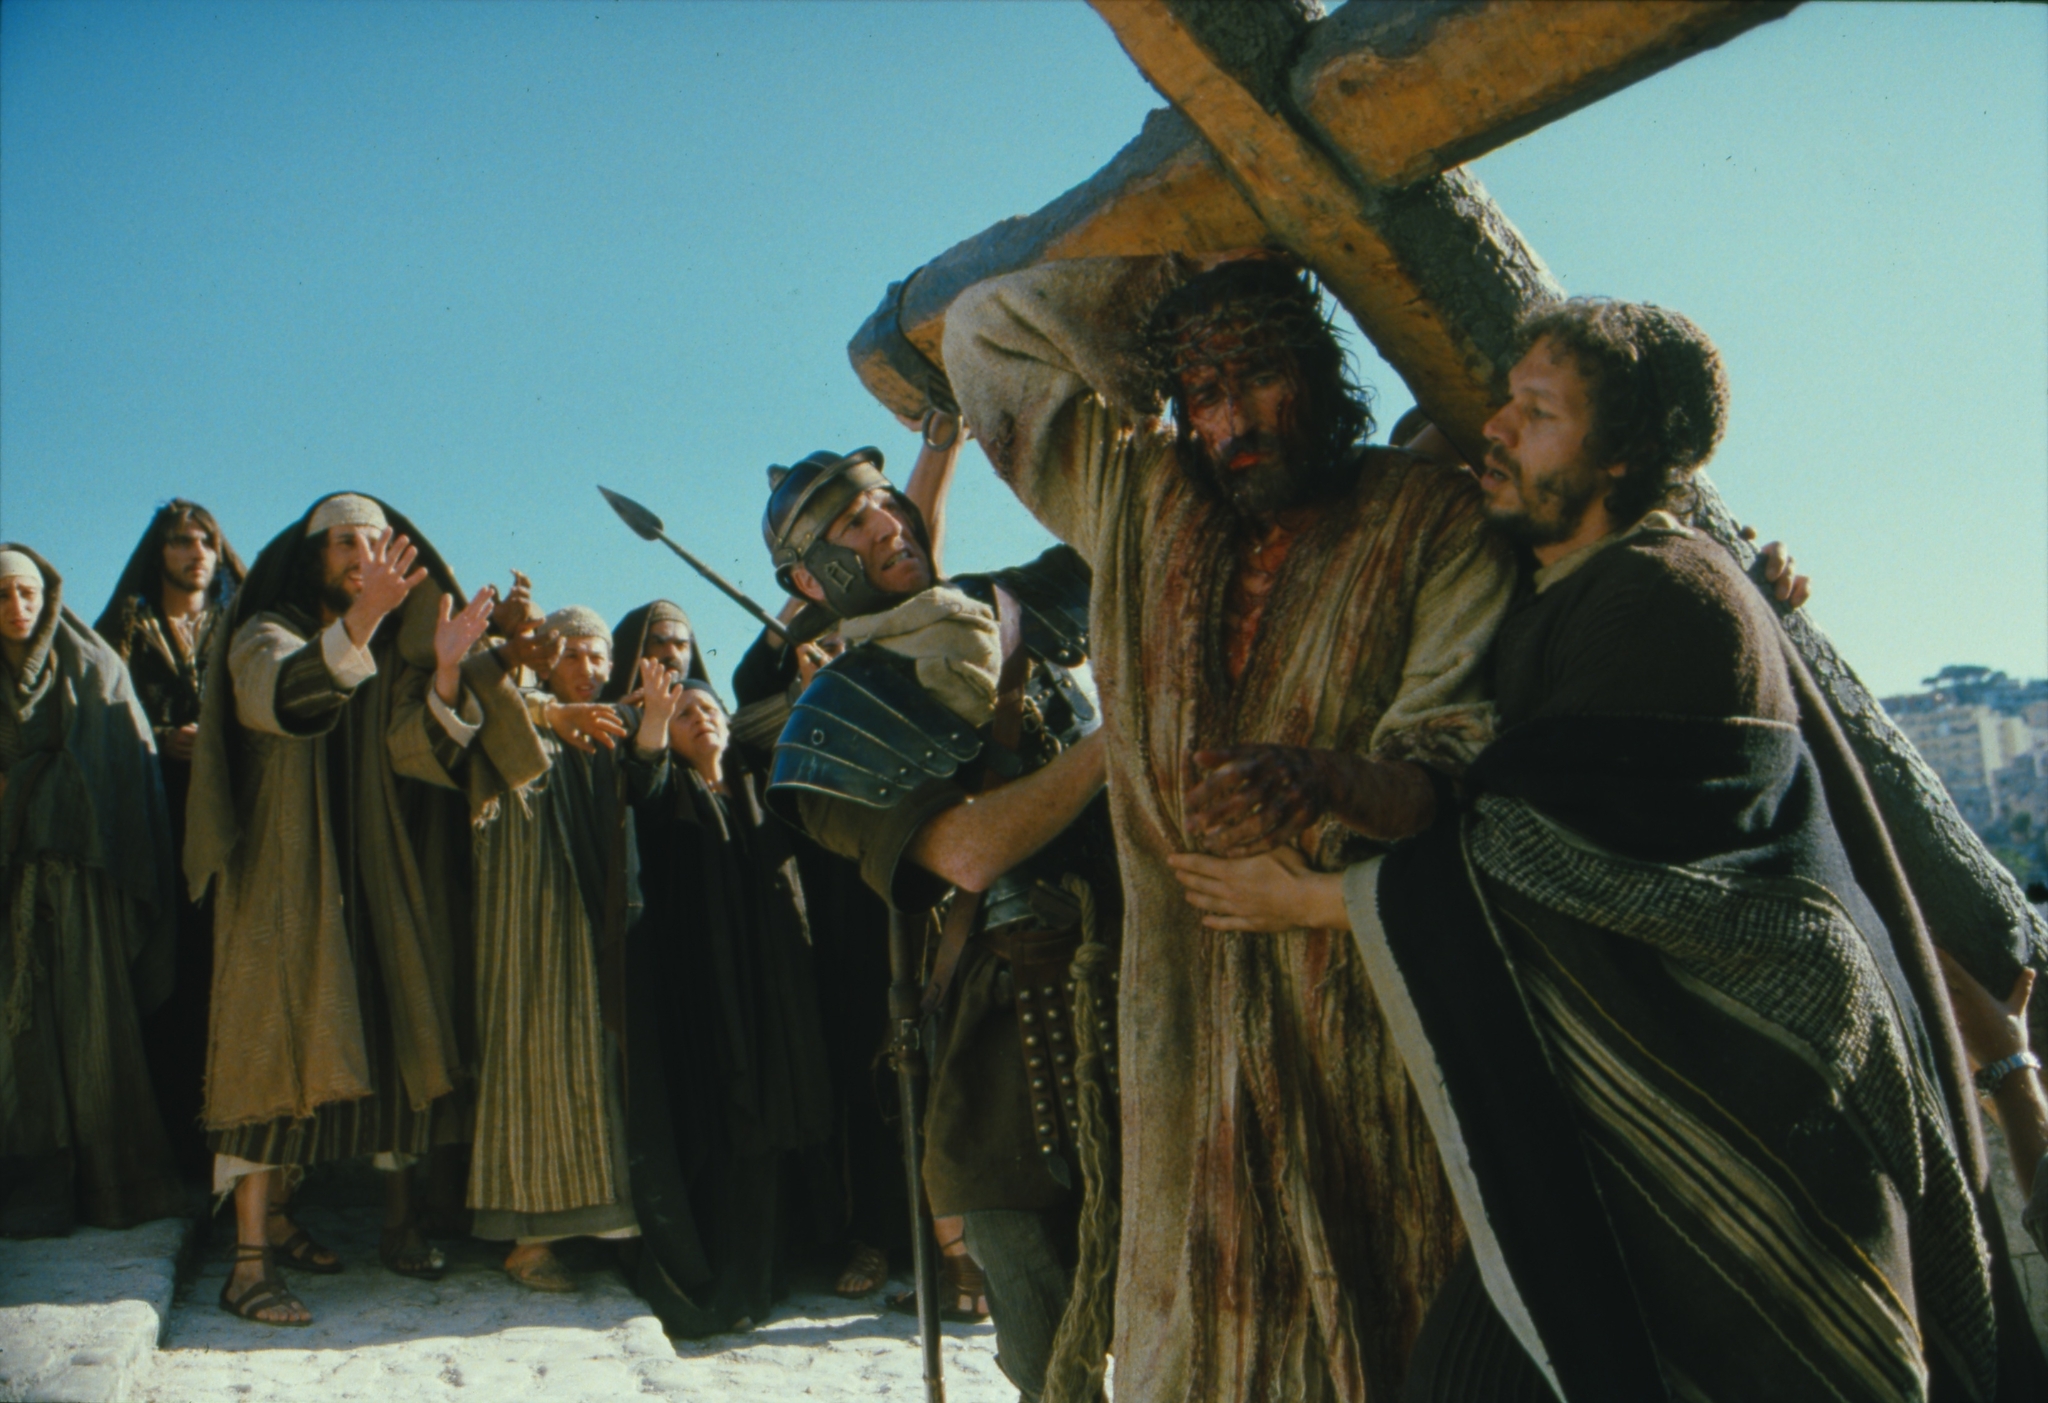 movies ruined with sex scenes - Passion of the Christ